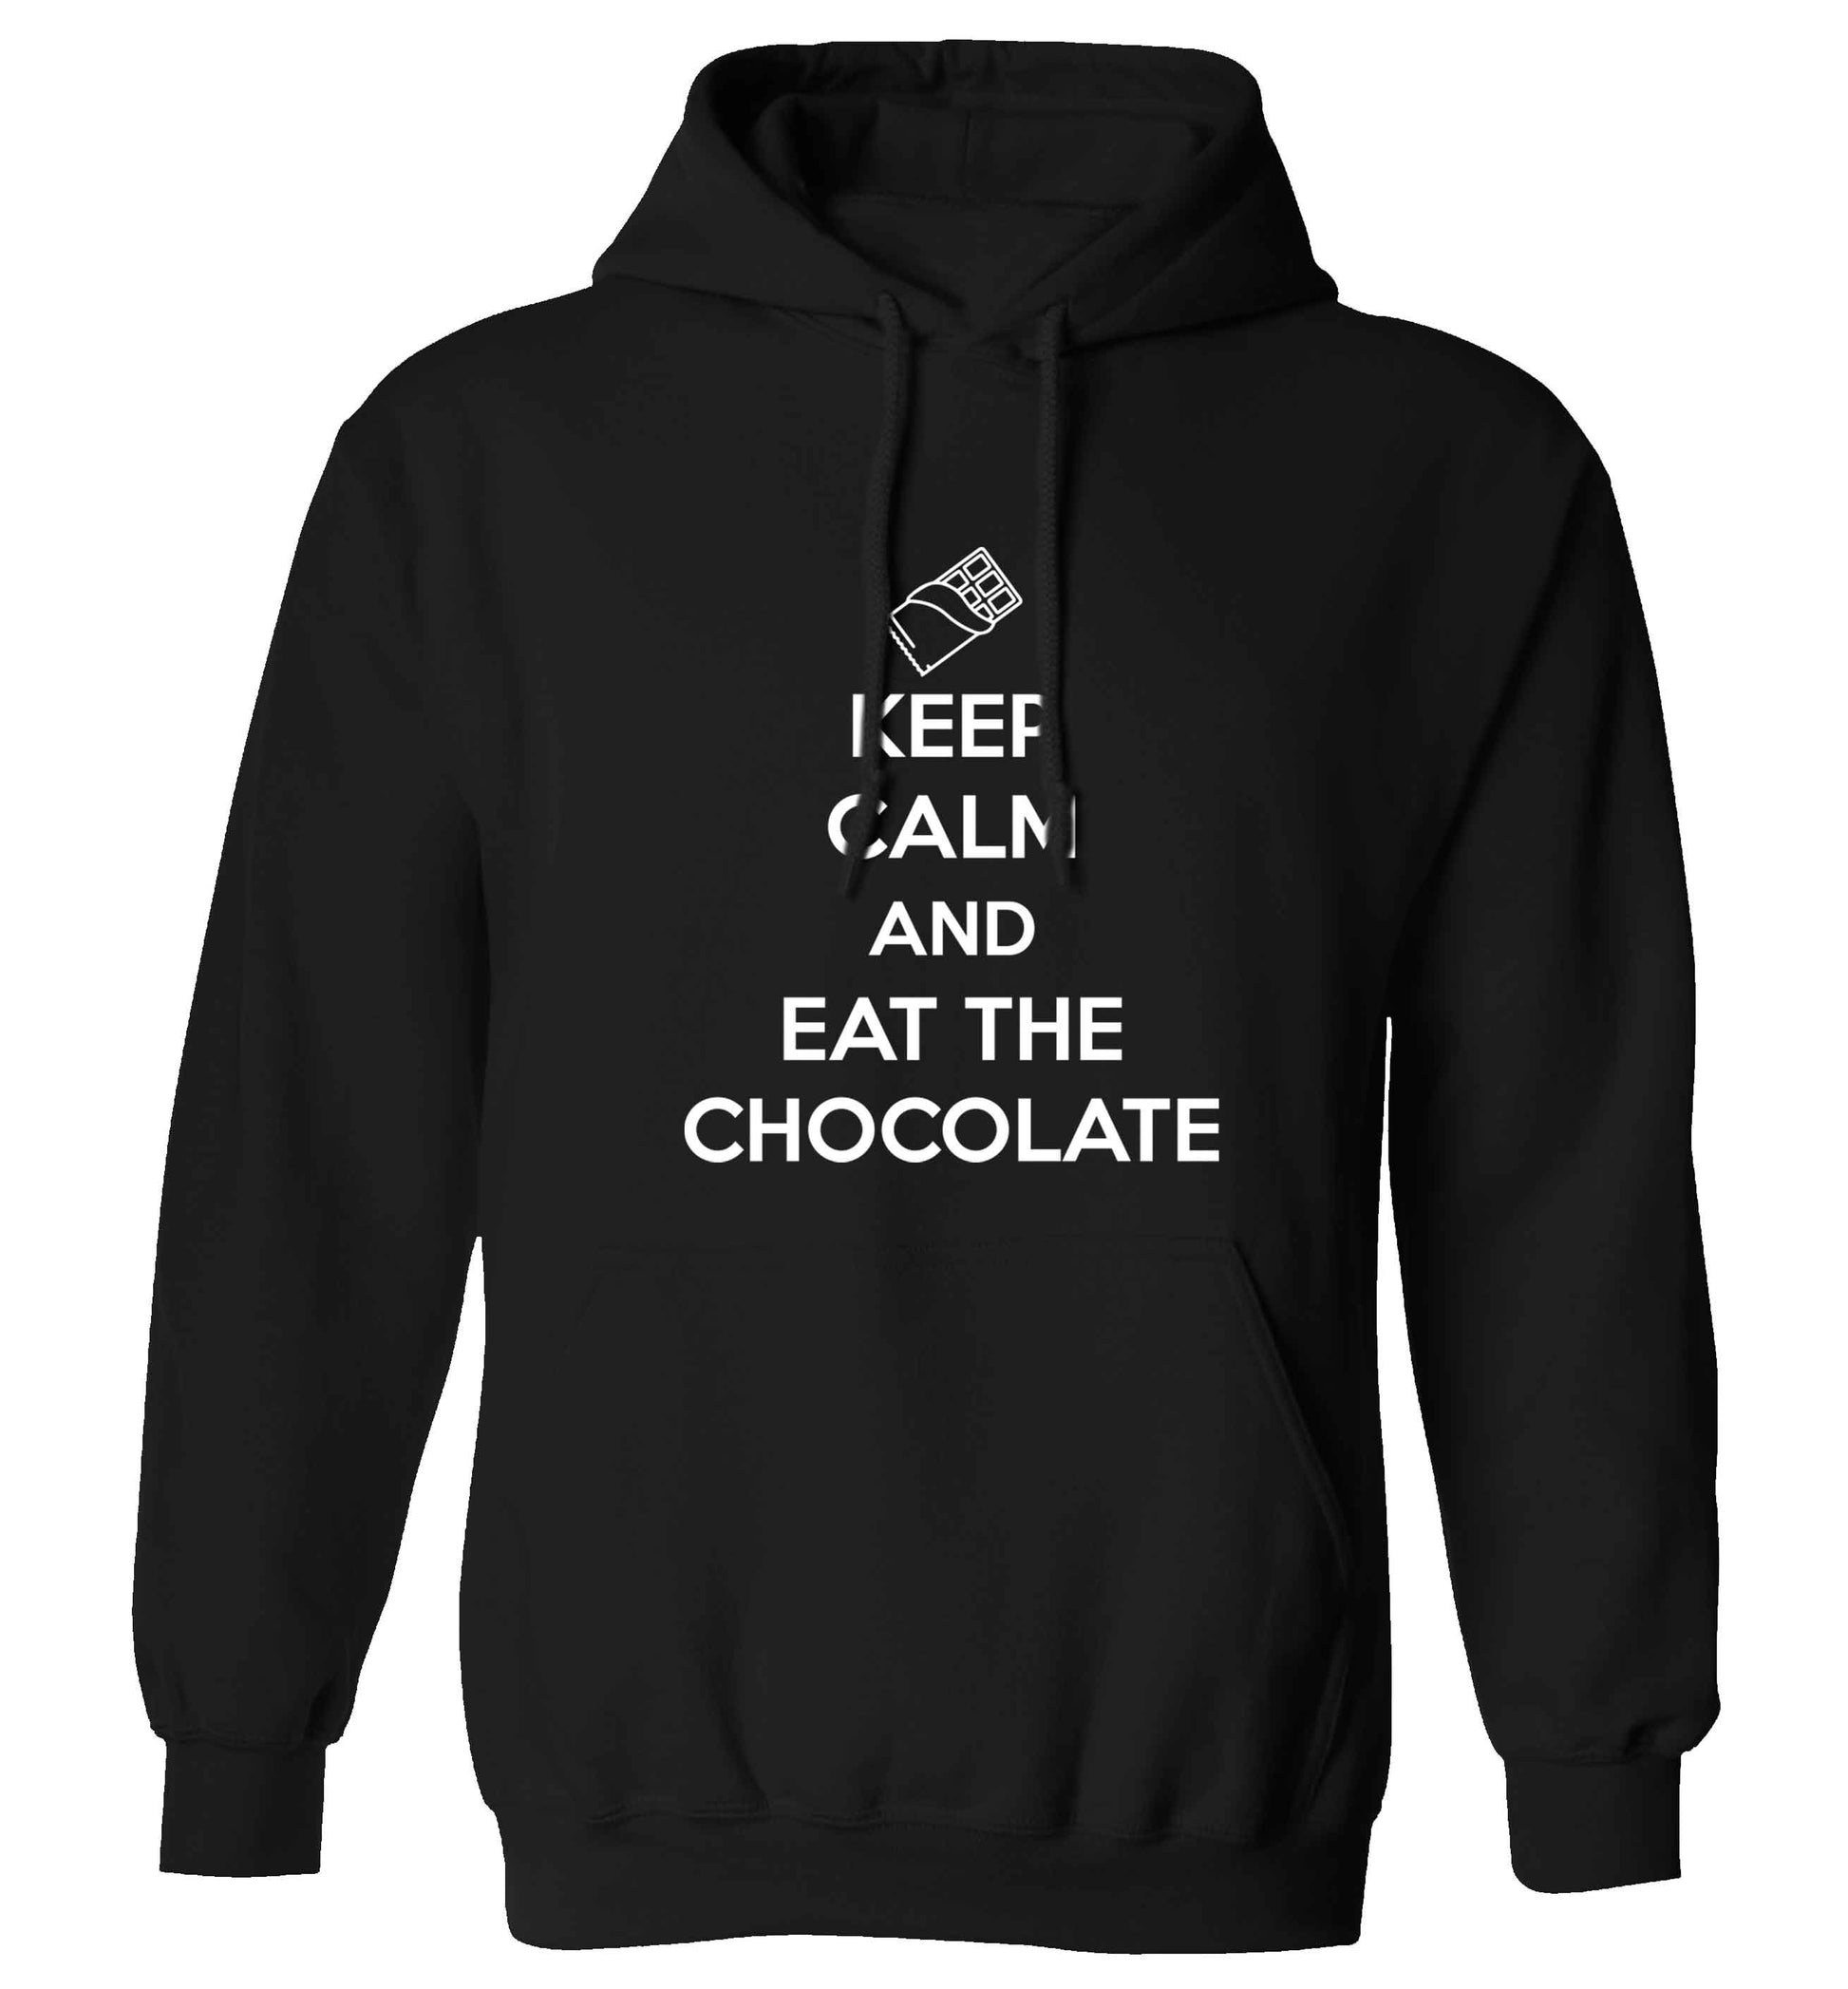 funny gift for a chocaholic! Keep calm and eat the chocolate adults unisex black hoodie 2XL